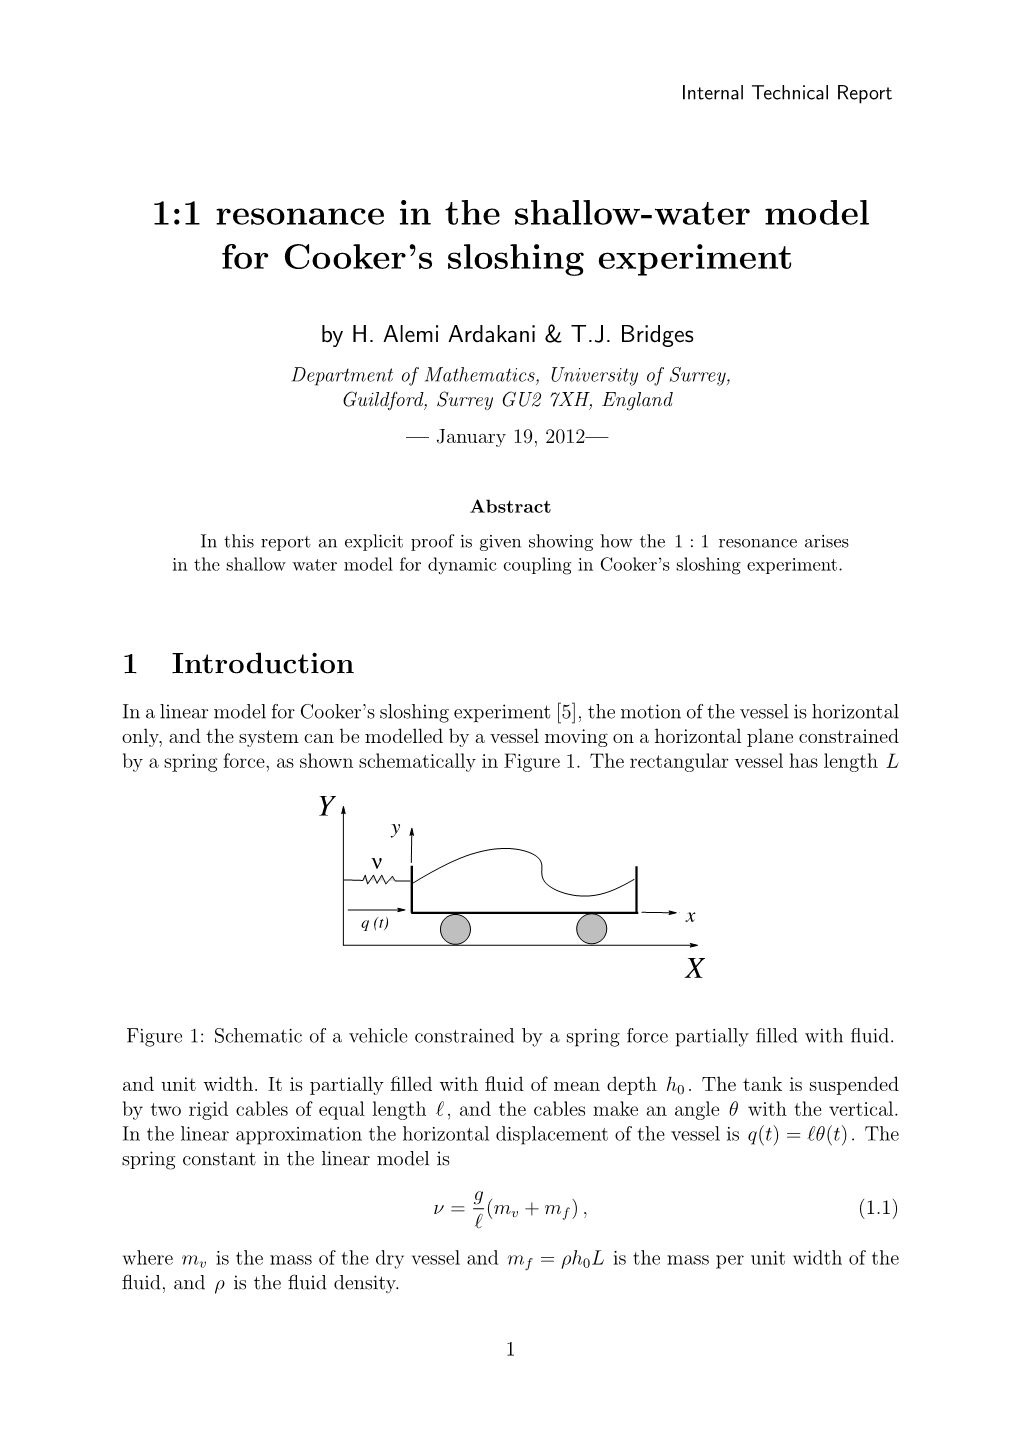 1:1 Resonance in the Shallow-Water Model for Cooker's Sloshing